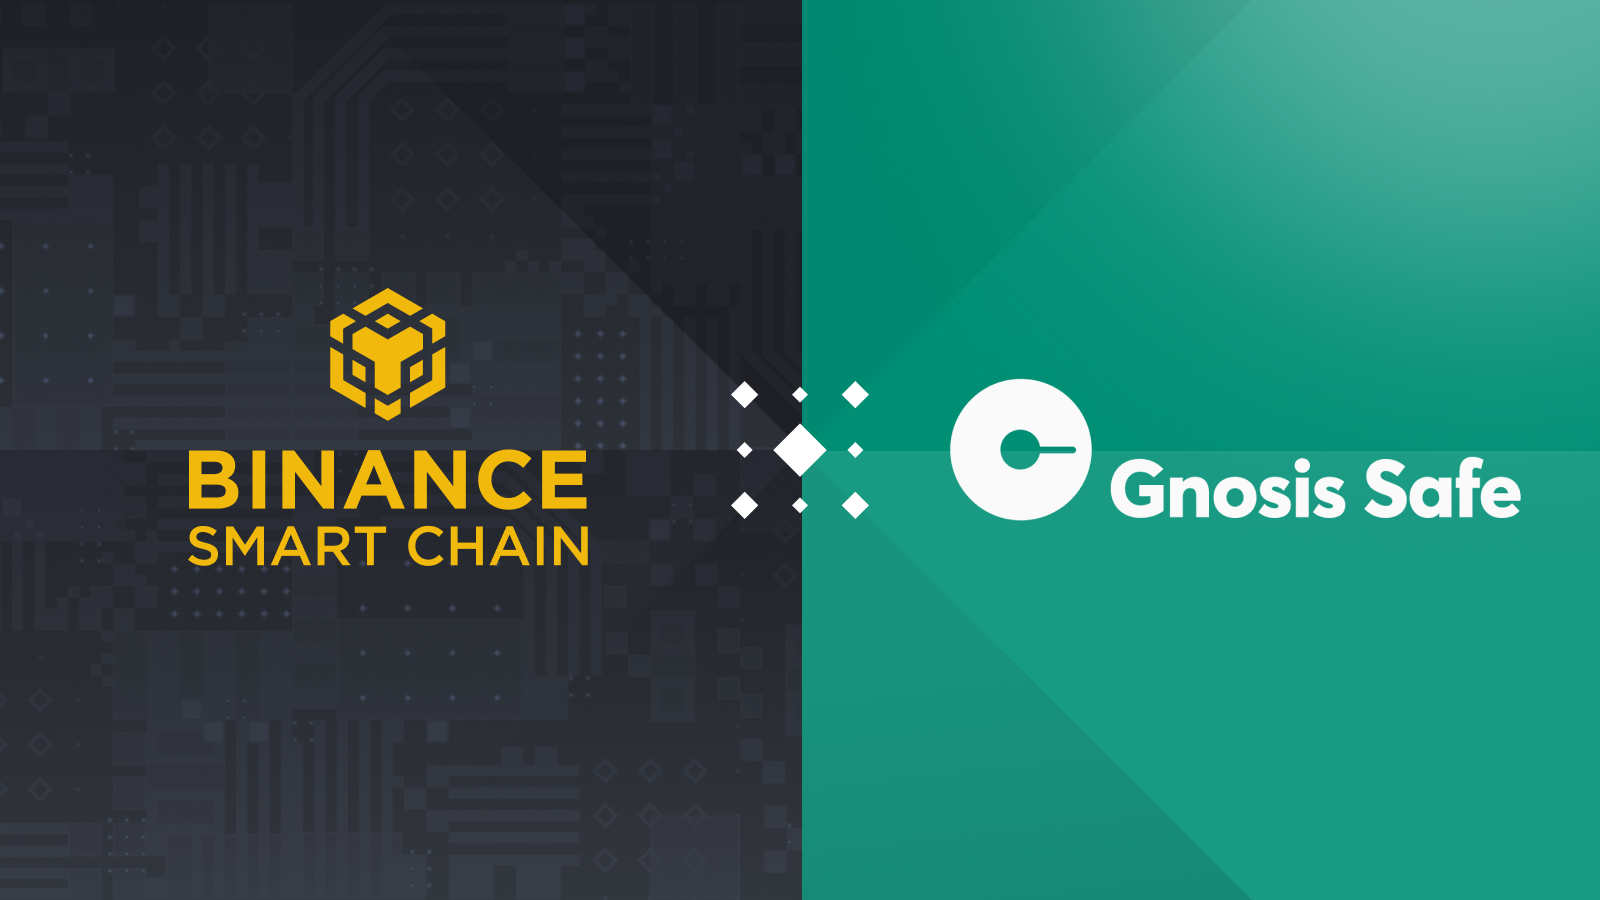 Announcing the Gnosis Safe Multisig Launch on Binance Smart Chain